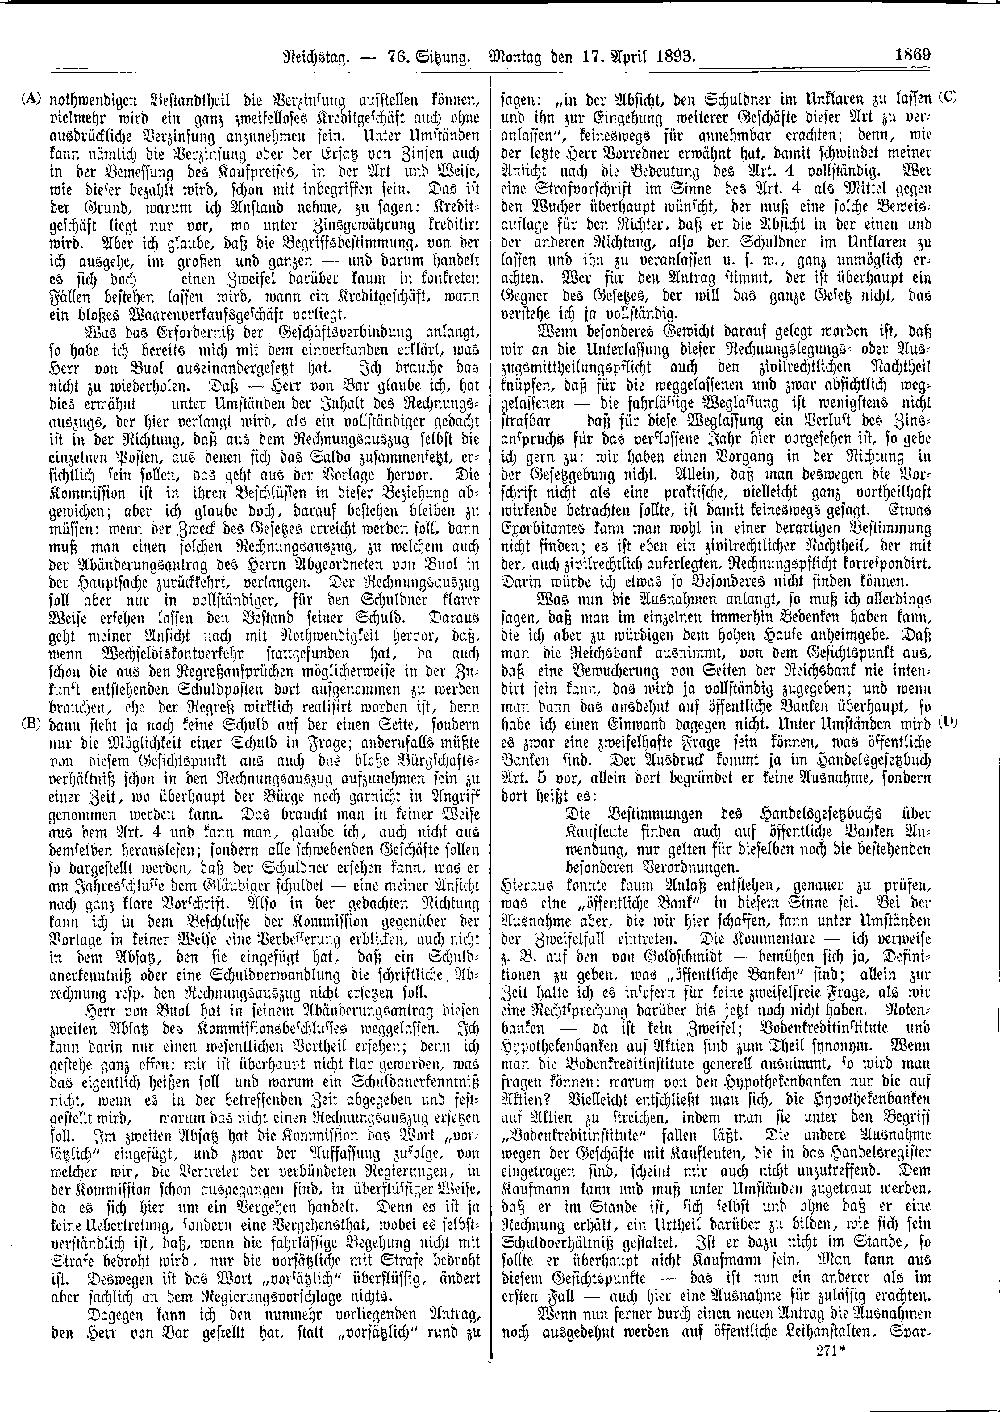 Scan of page 1869